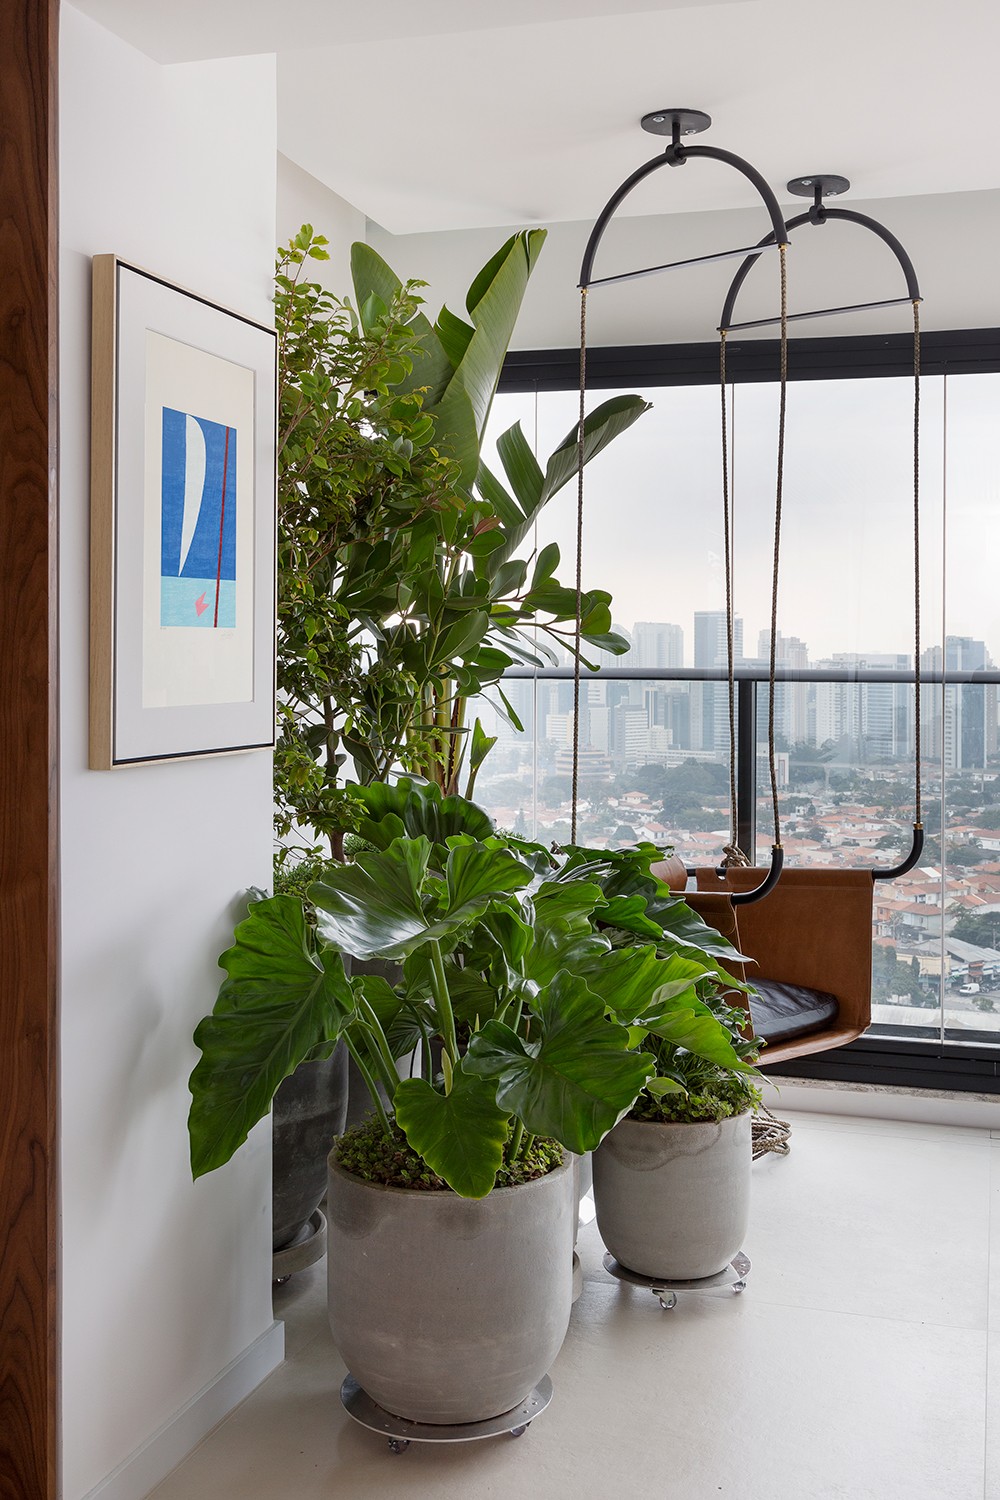 BALCONY |  The balcony is a cozy environment, which allows you to relax while residents enjoy the view.  Balanço Sela is from Decarvalho atelier (Photo: Julia Ribeiro / Publicity)